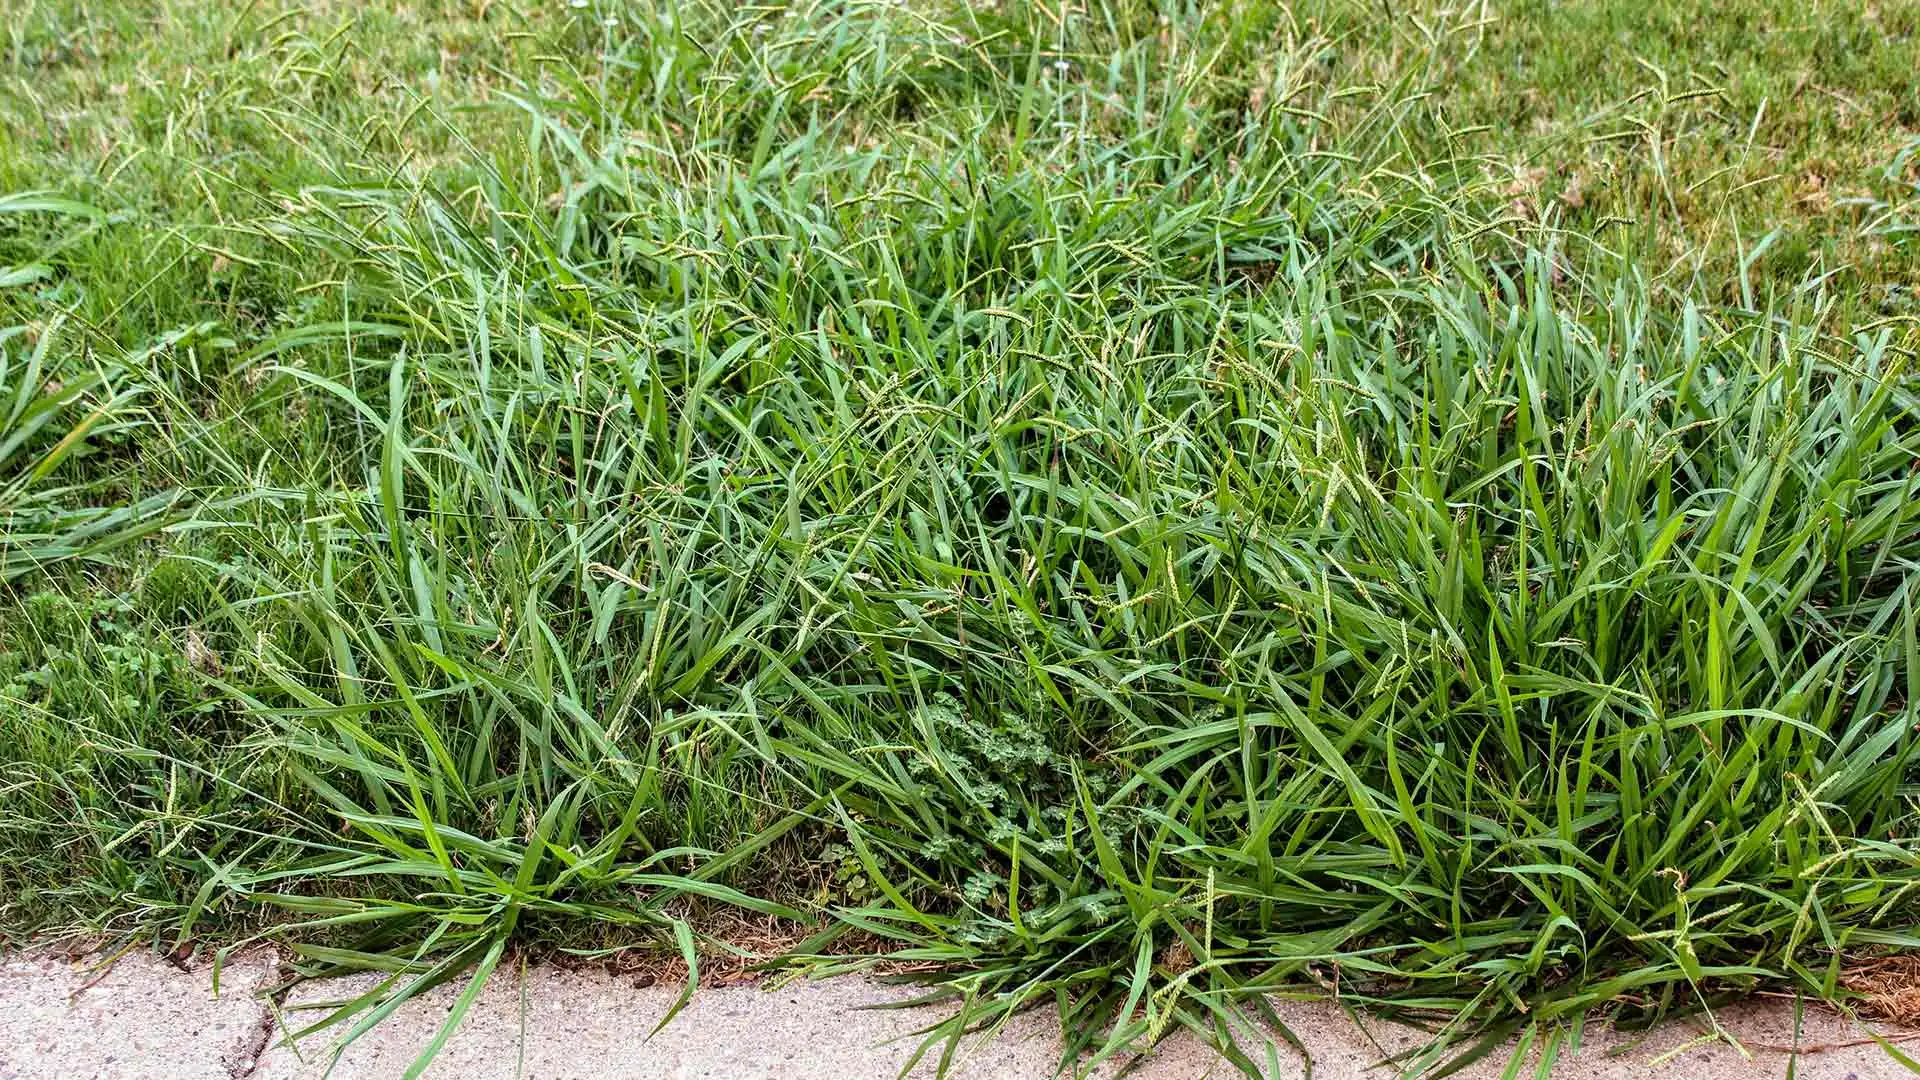 Identifying Dallisgrass and how to kill it